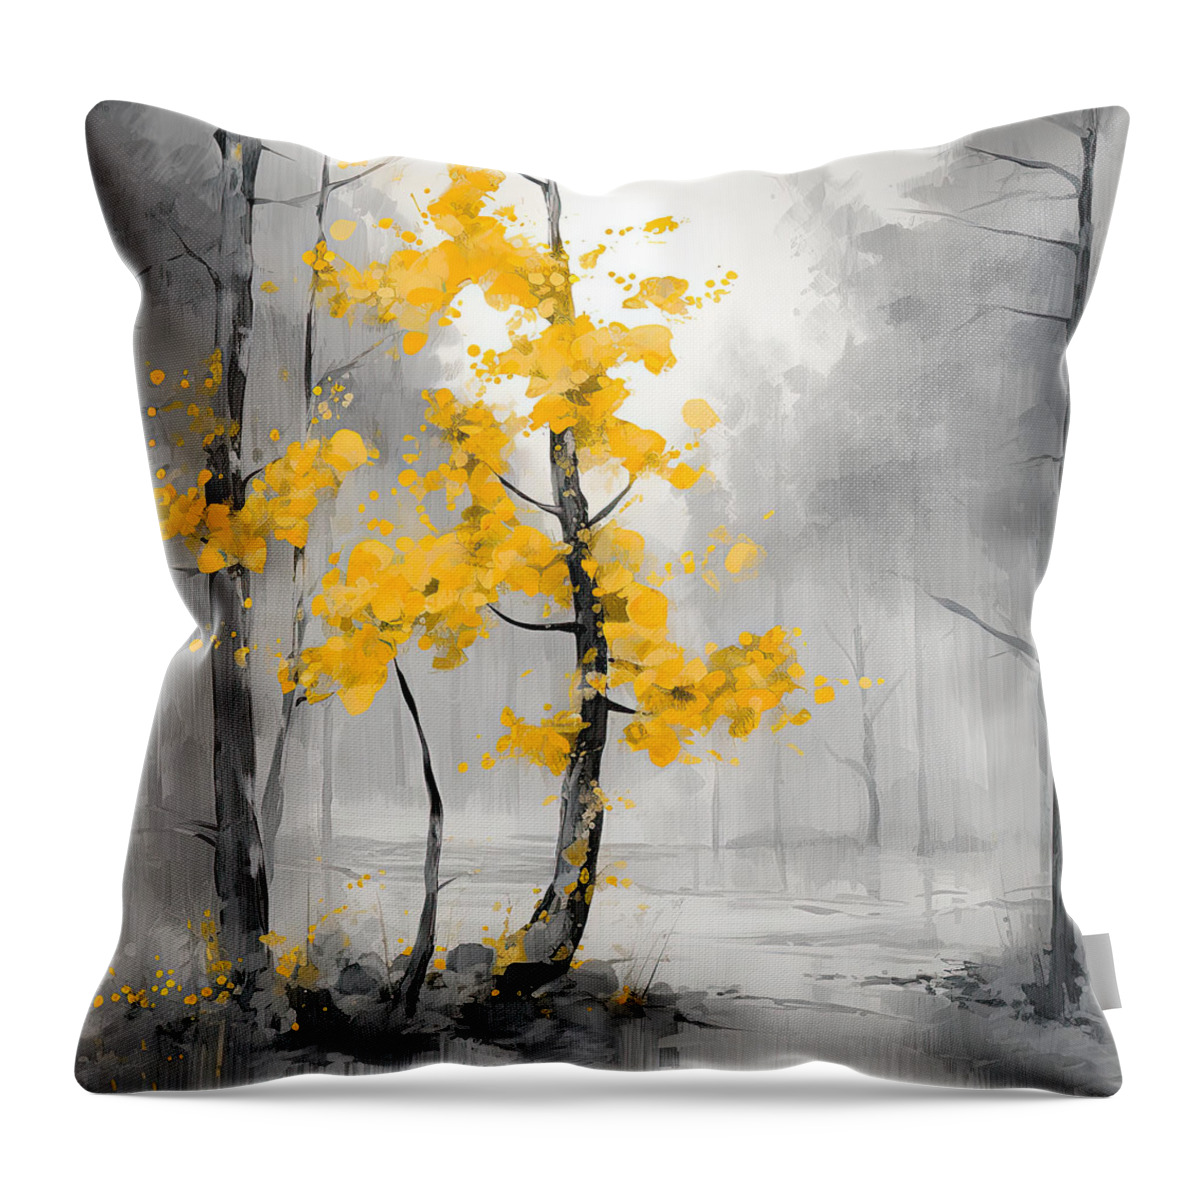 Yellow Throw Pillow featuring the painting Lovely Sunny Autumn Day by Lourry Legarde